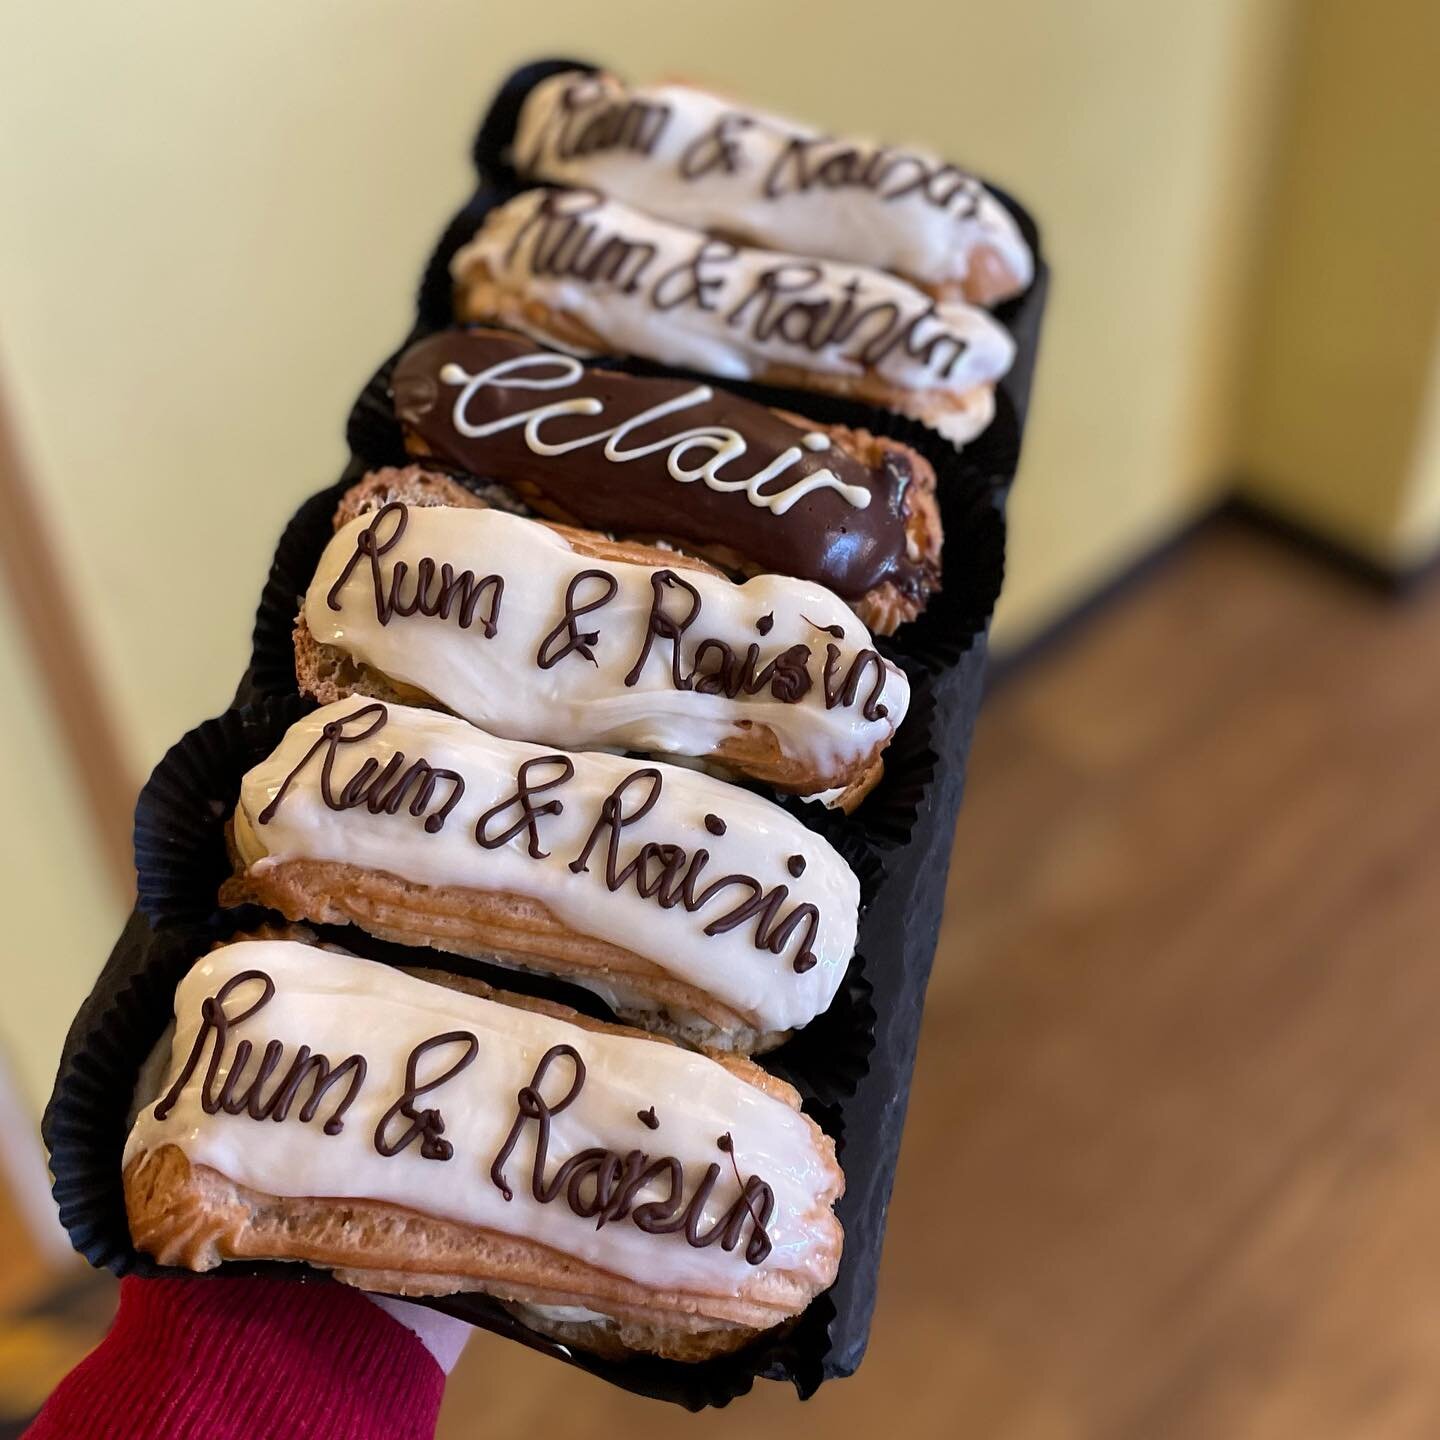 Getting festive today! Yummy homemade eclairs with rum &amp; raisin cr&egrave;me diplomat filling. Treat yourself after your Christmas shopping!